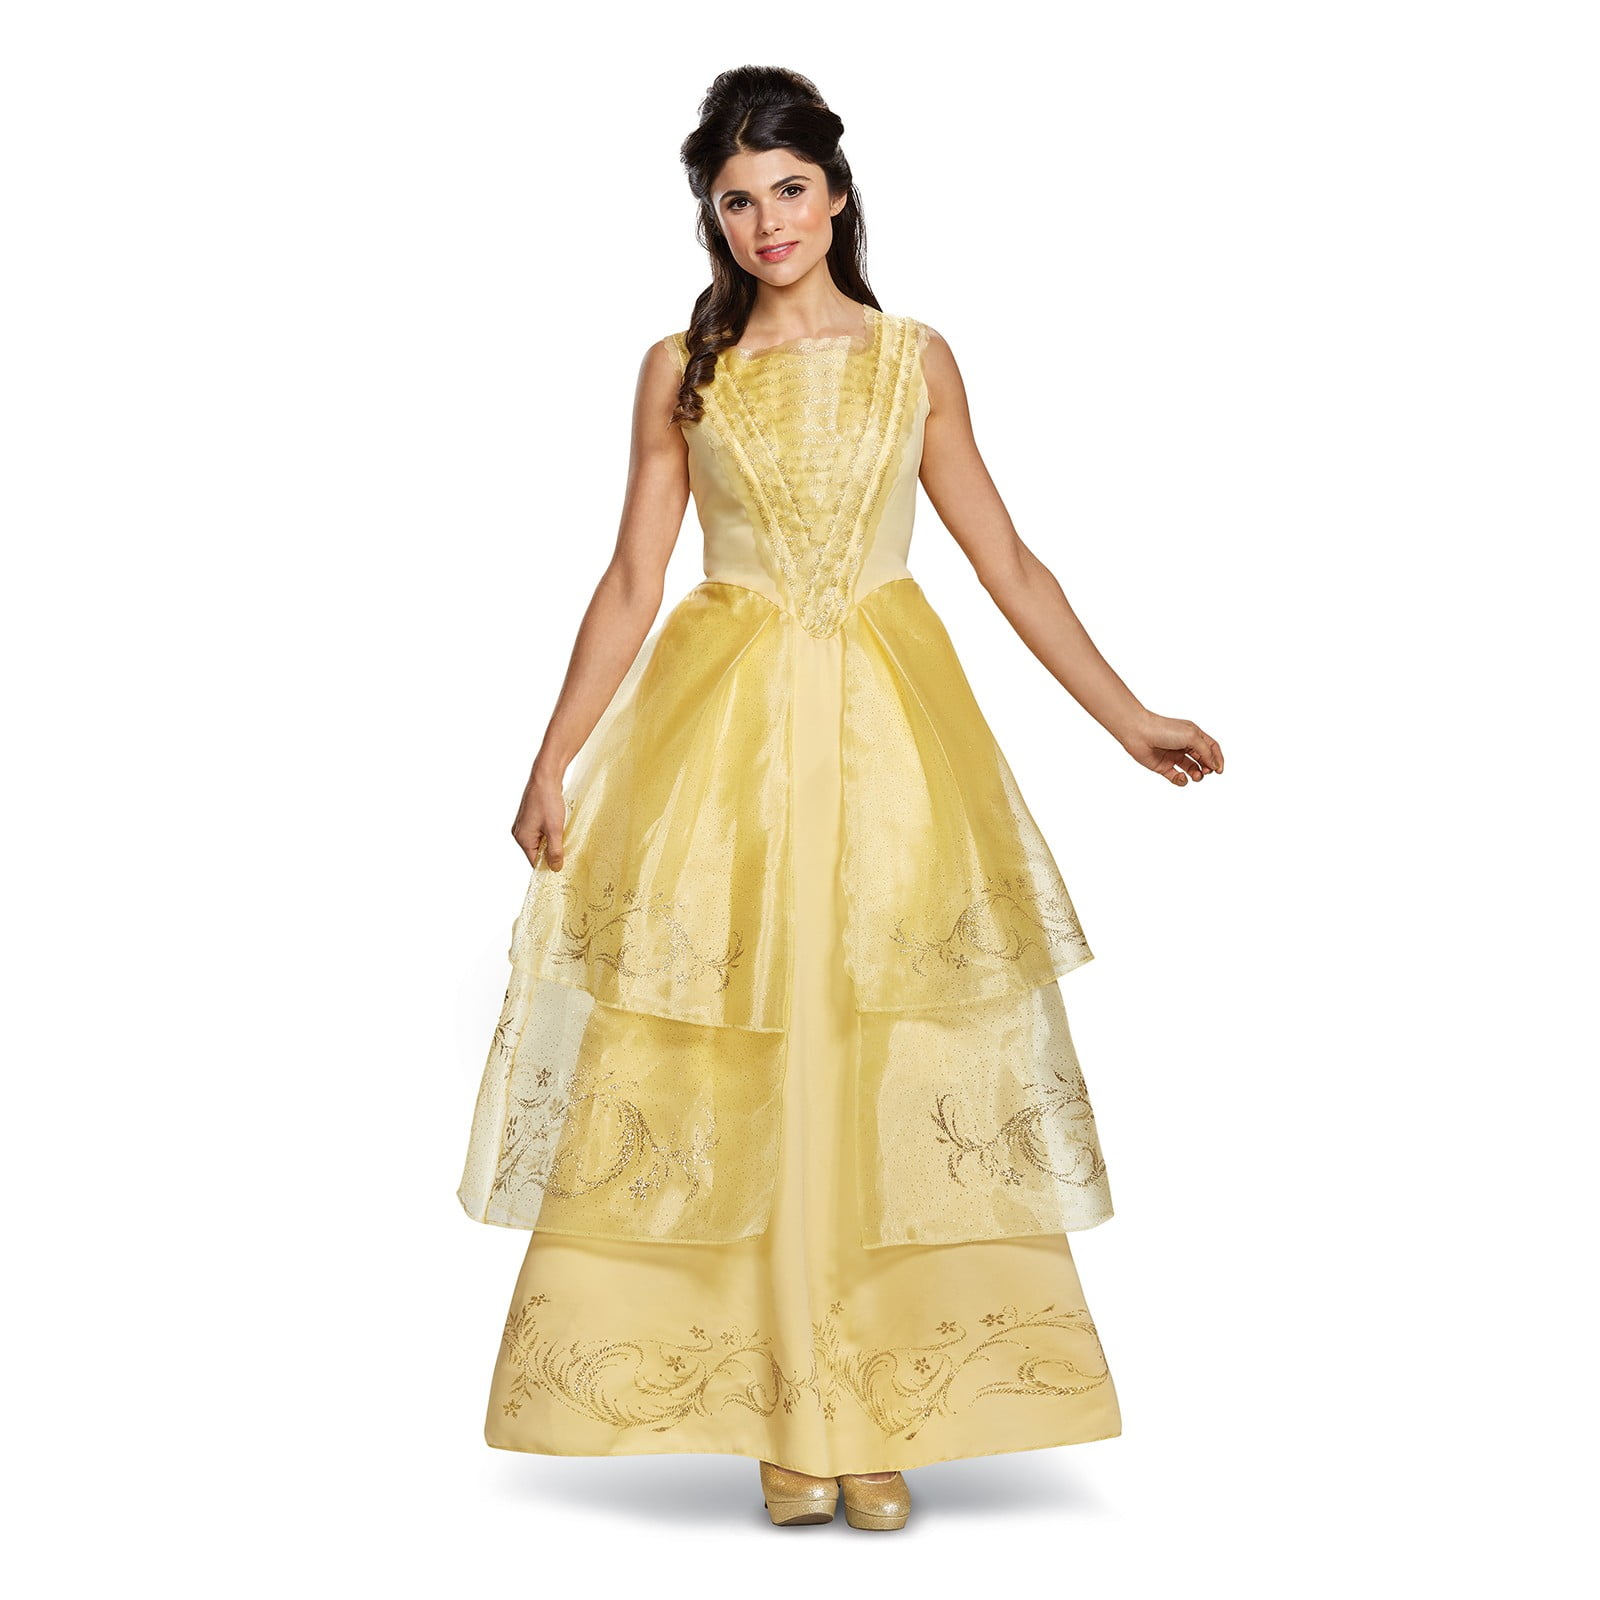 Adult Beauty and The Beast Princess Belle Cosplay Costume Ball Gown Fancy Dress 